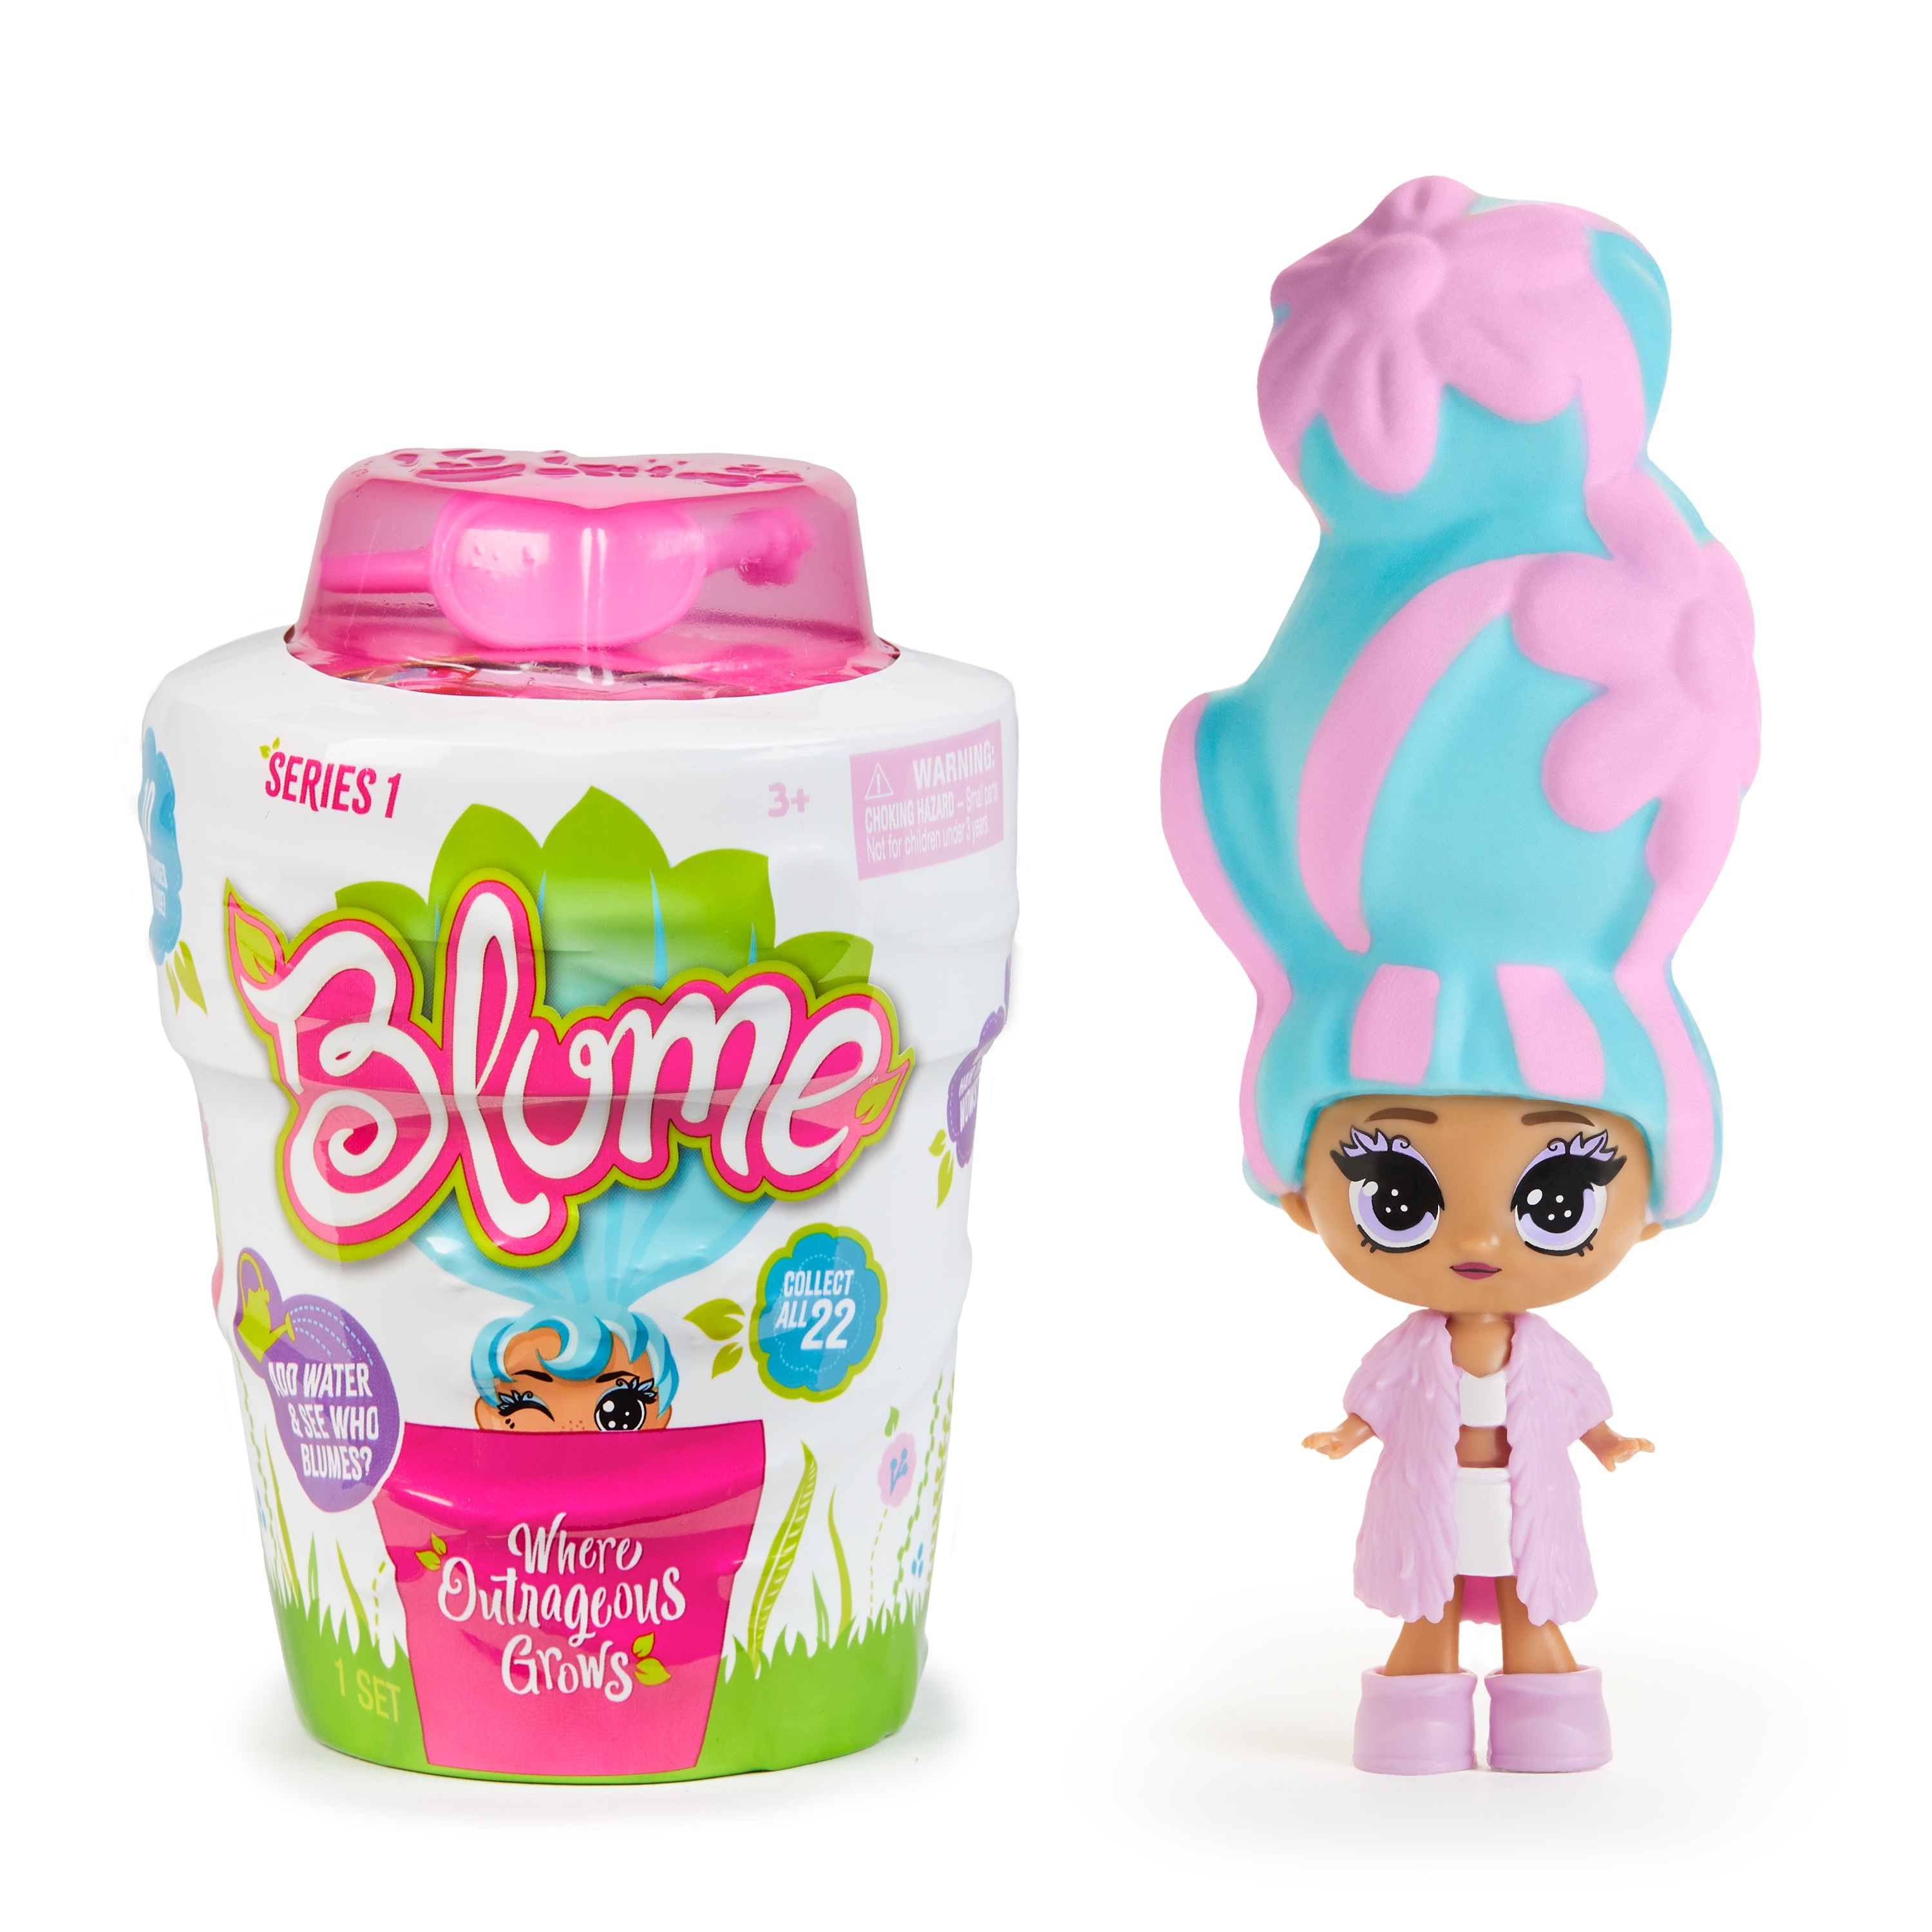 Blume doll review